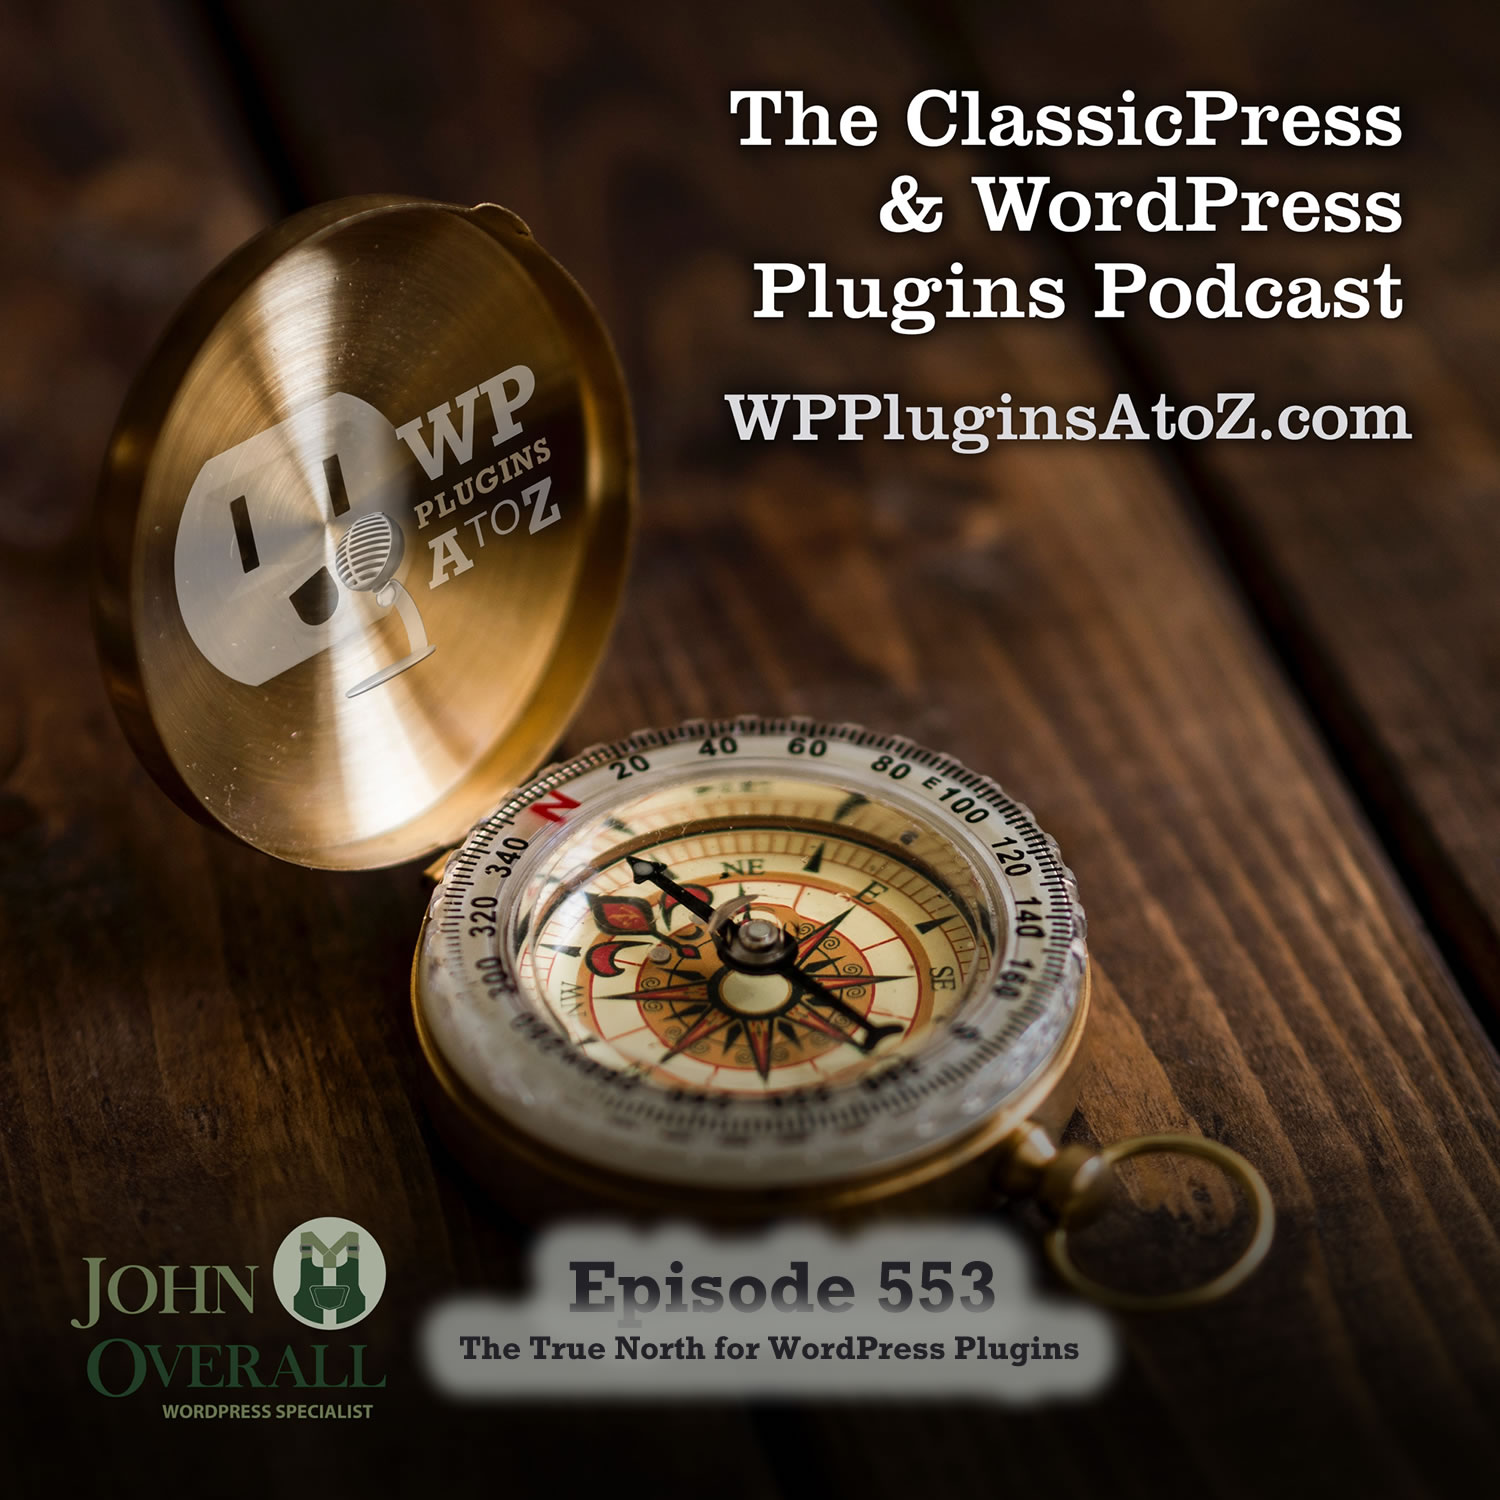 It's Episode 553 and we have plugins for Block for Events, Memory Logging, Download Delay, Starbox Humans, Simple Box, Complianz... and ClassicPress Options. It's all coming up on WordPress Plugins A-Z!